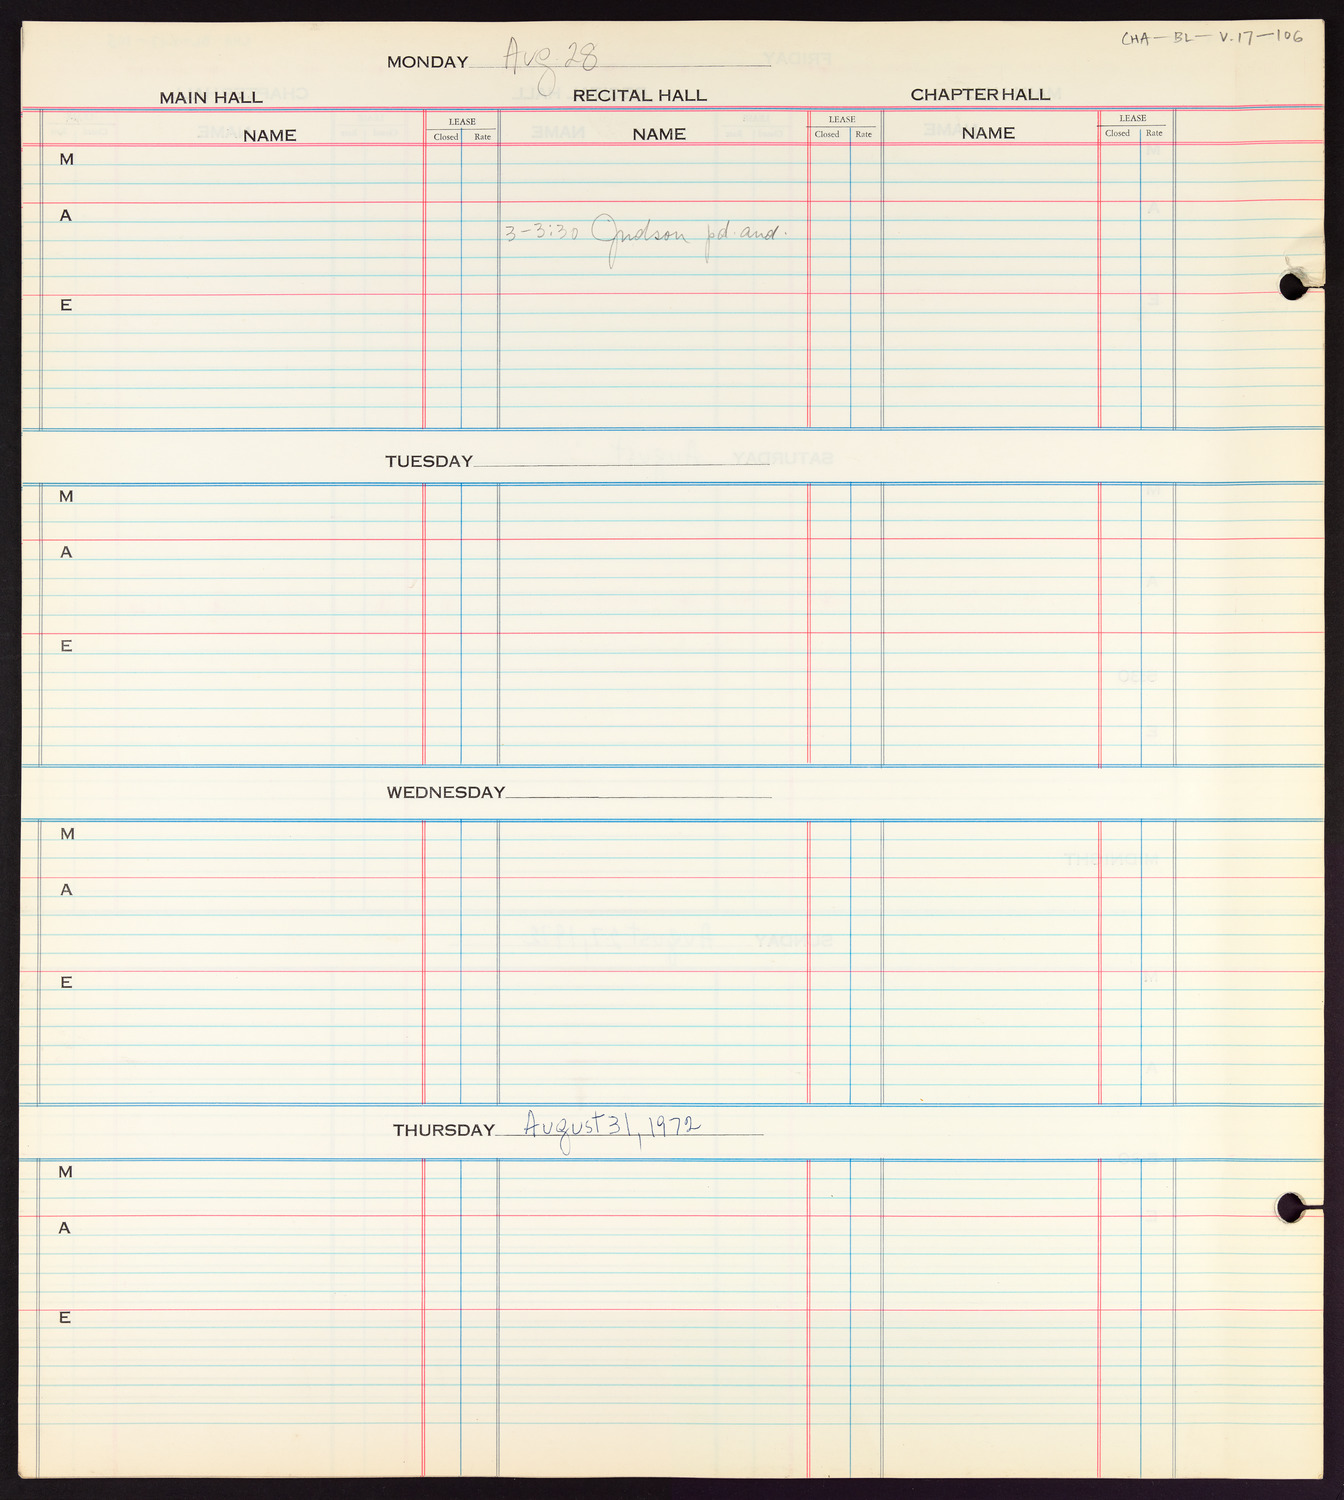 Carnegie Hall Booking Ledger, volume 17, page 106